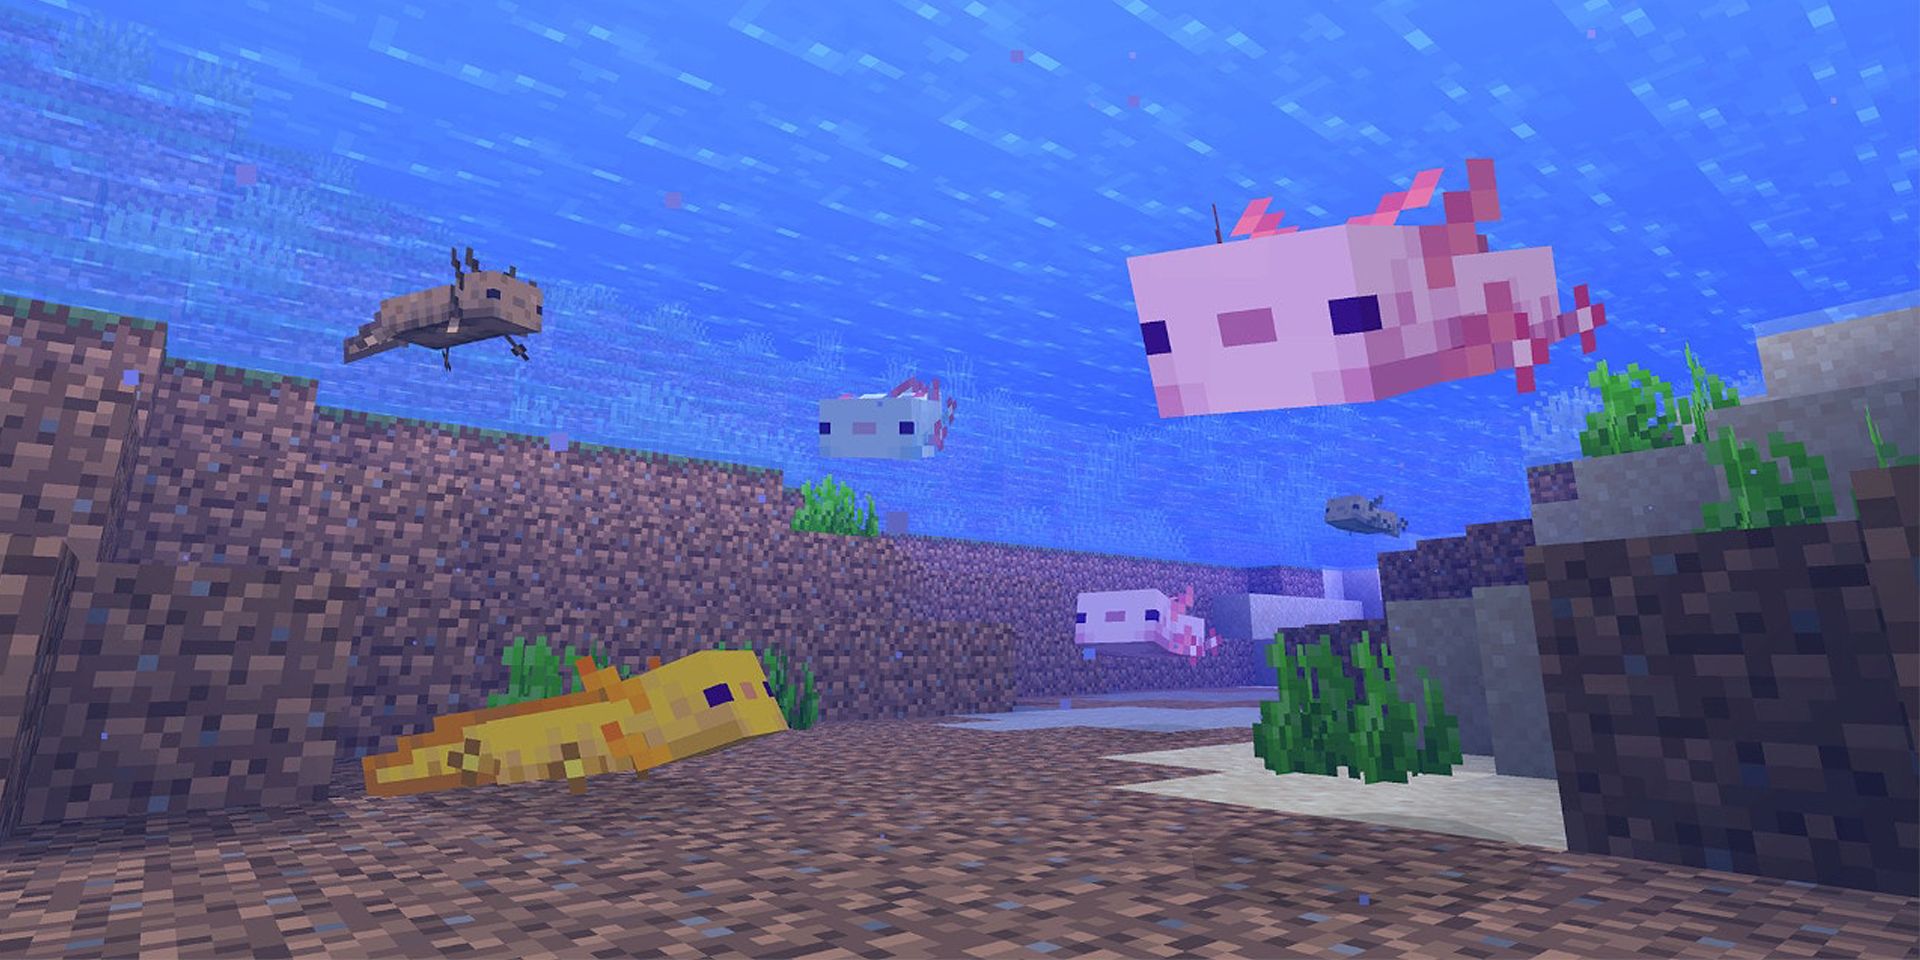 A group of Axolotls in Minecraft